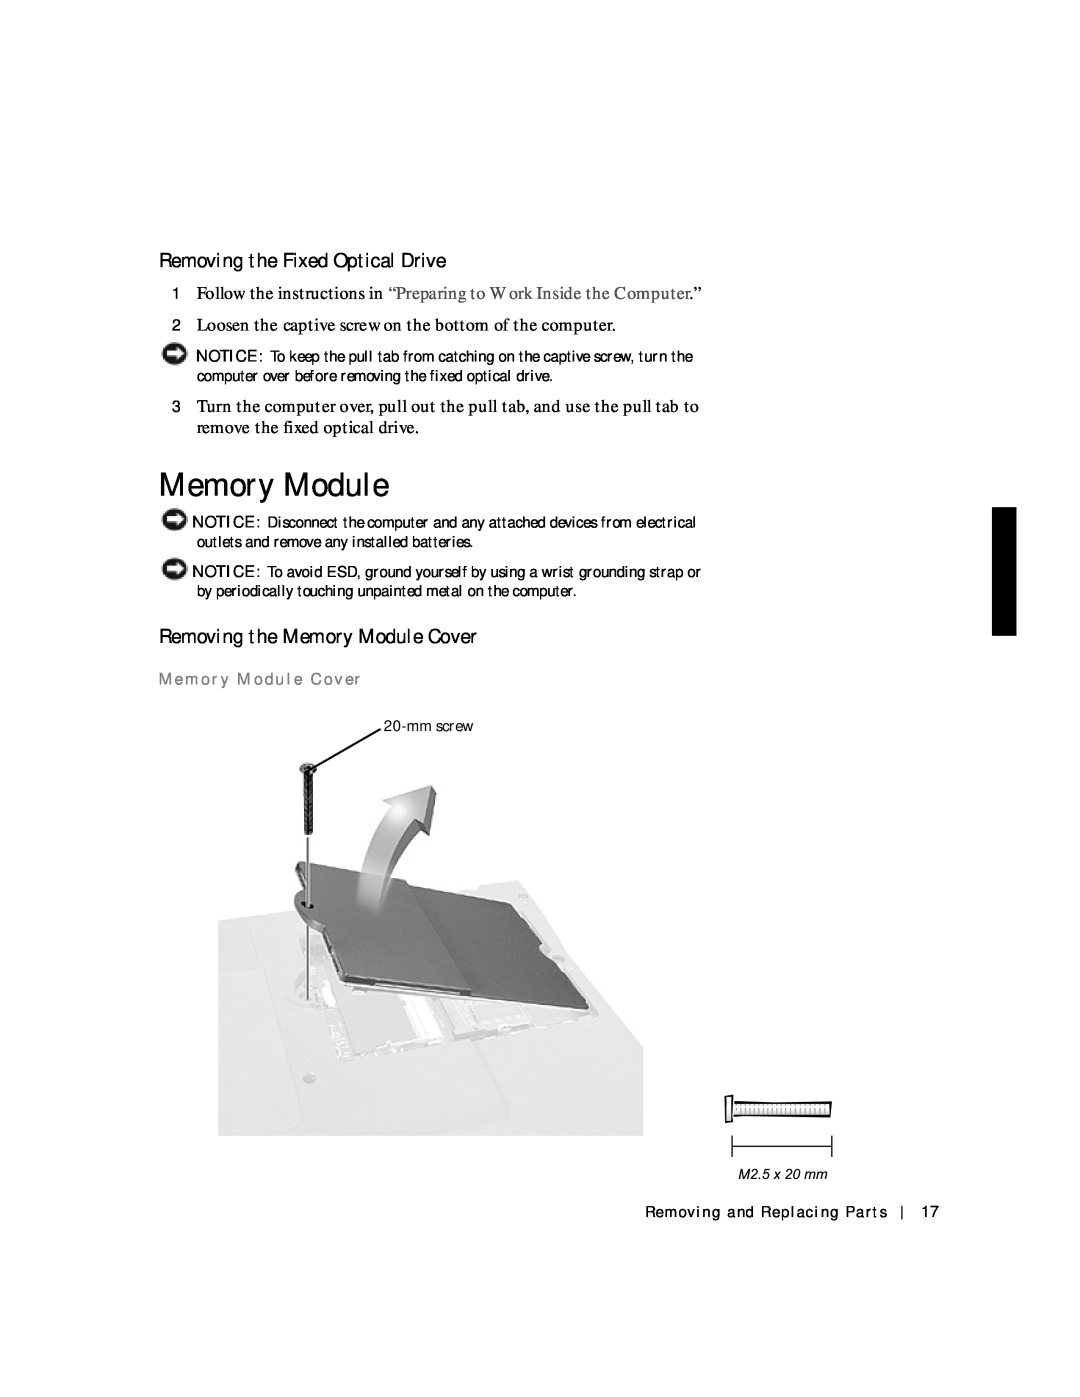 Applied Energy Products C800 service manual Removing the Fixed Optical Drive, Removing the Memory Module Cover 